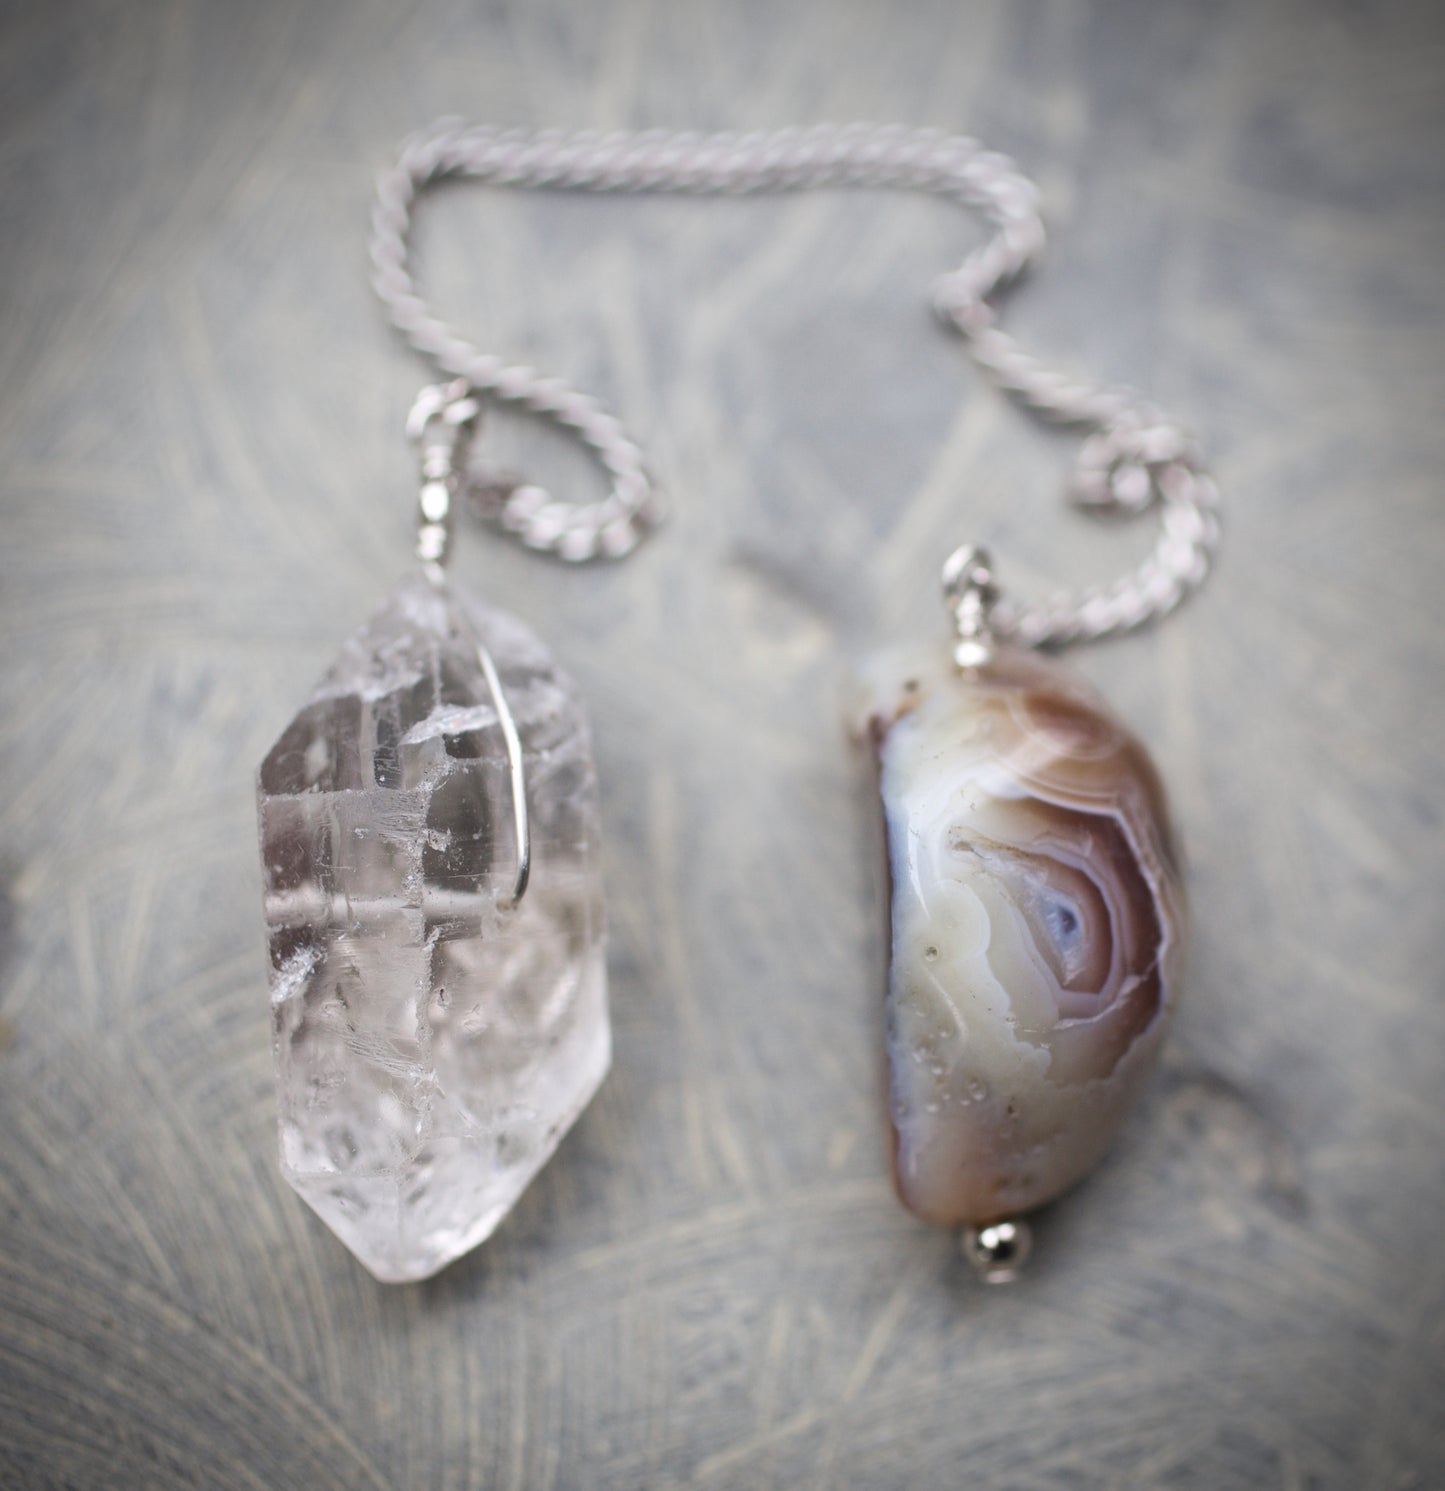 Double Termination Clear Quartz Warrior Crystal, Botswana Agate, and Sterling Silver Double-sided Pendulum